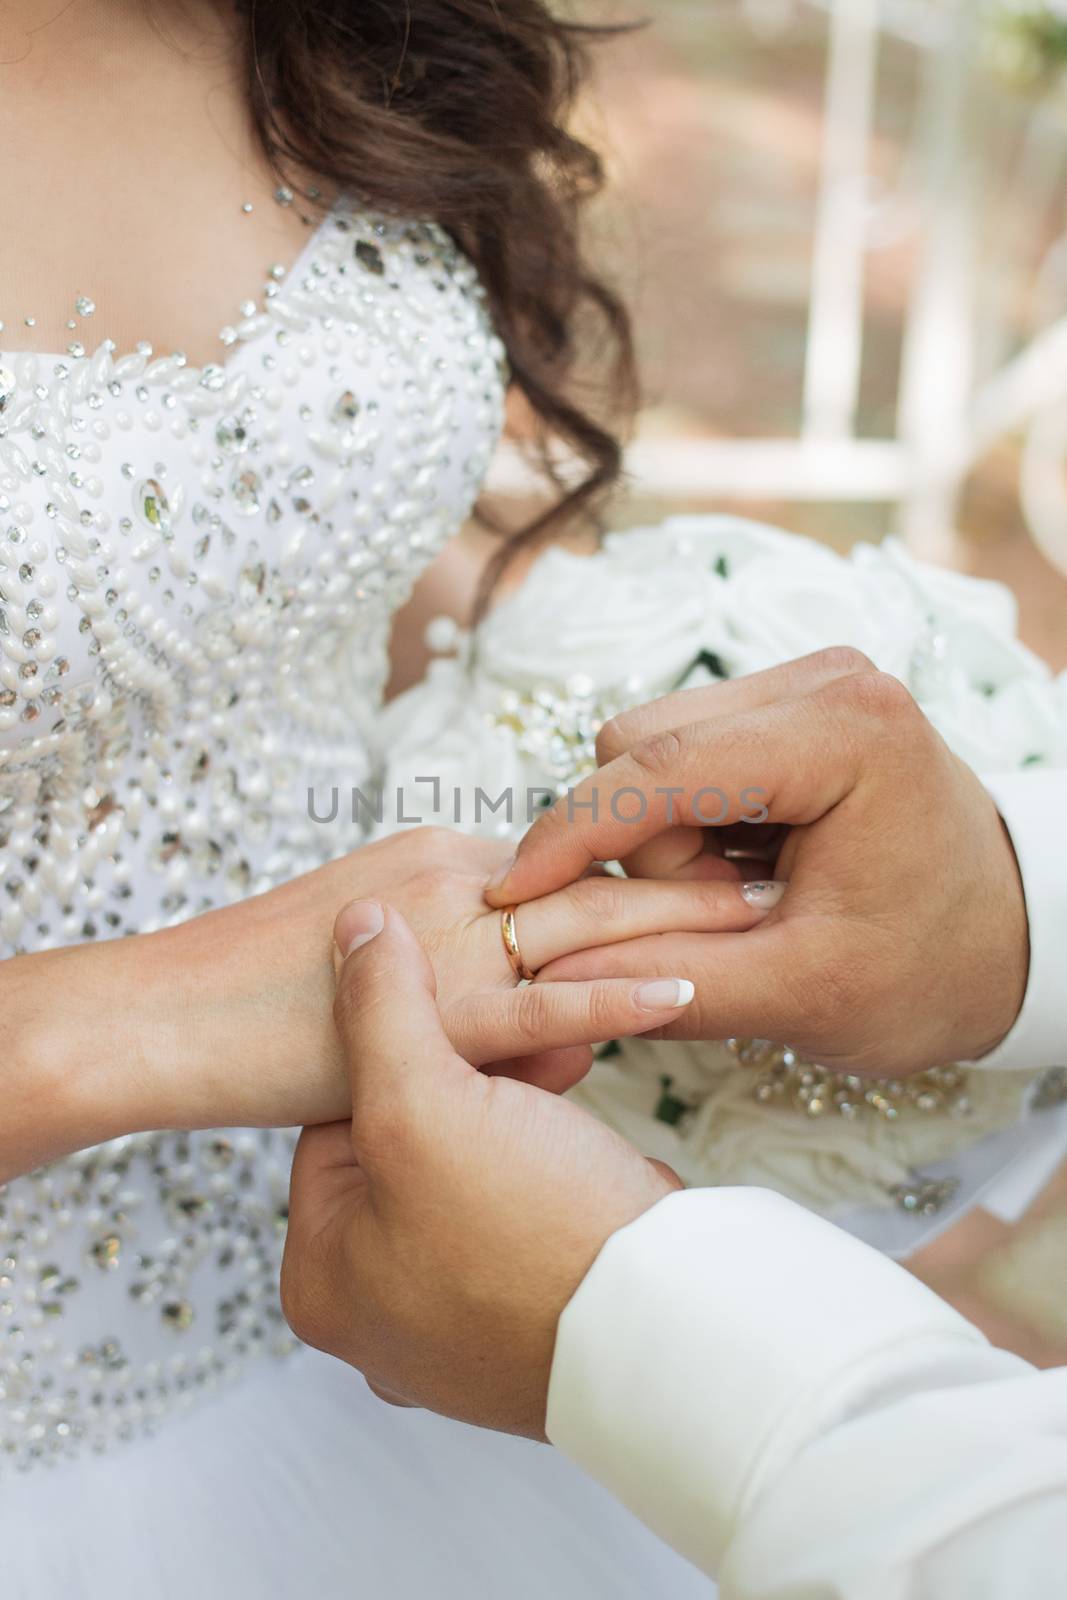 The groom places the ring on the bride's hand. Photo closeup by 3KStudio